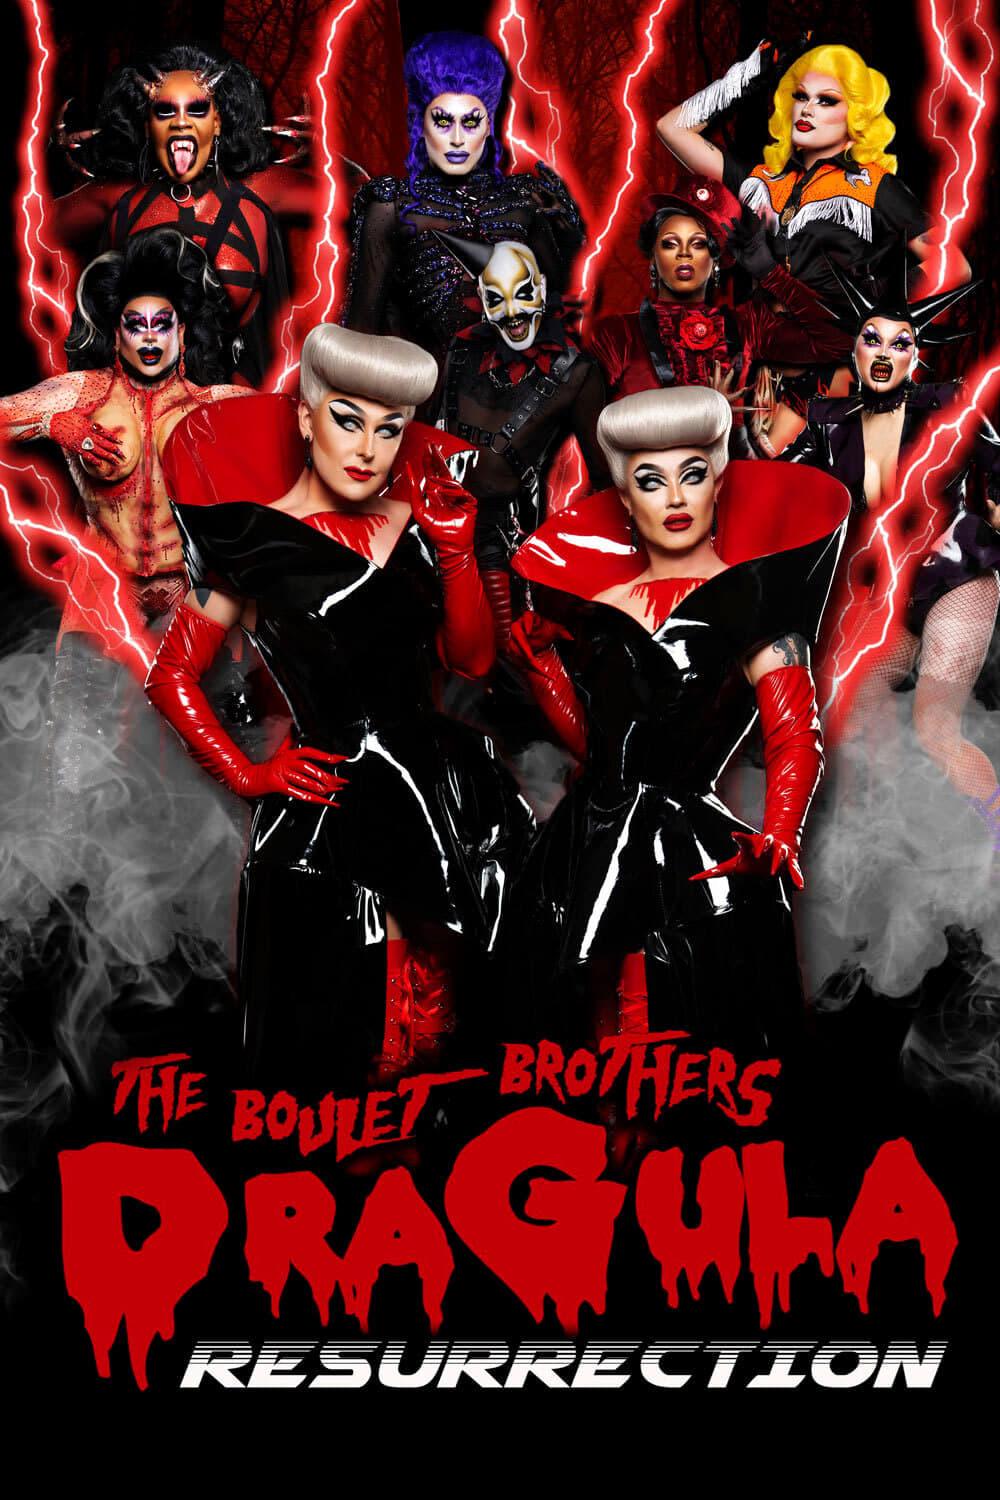 The Boulet Brothers' Dragula: Resurrection poster